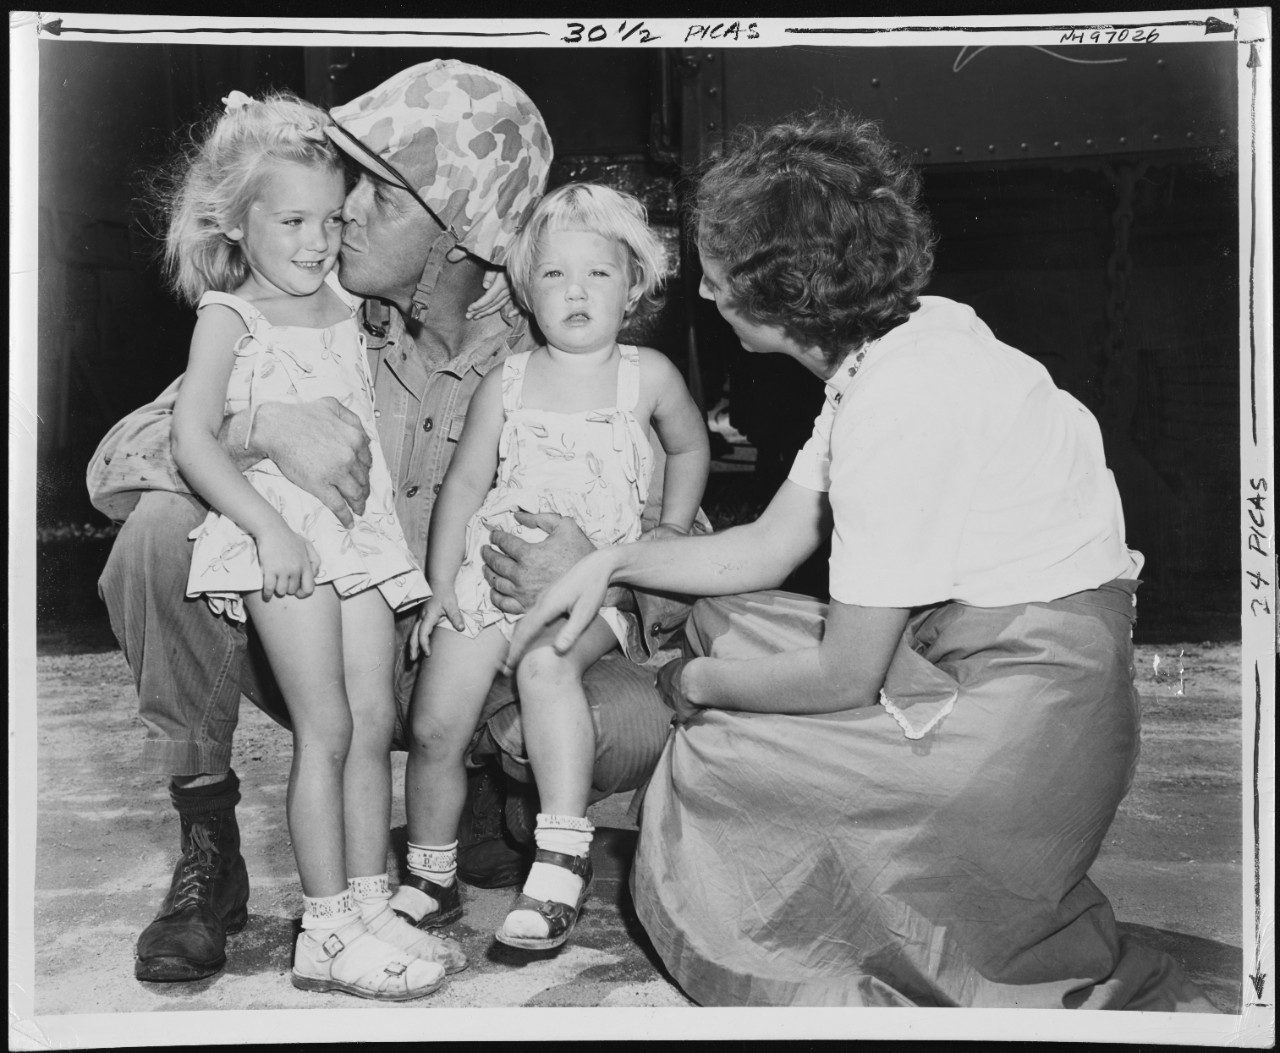 Photo #: NH 97026 "A Marine bids farewell to his wife and two daughters as elements of the famed Second Marine Division leave for the West Coast"